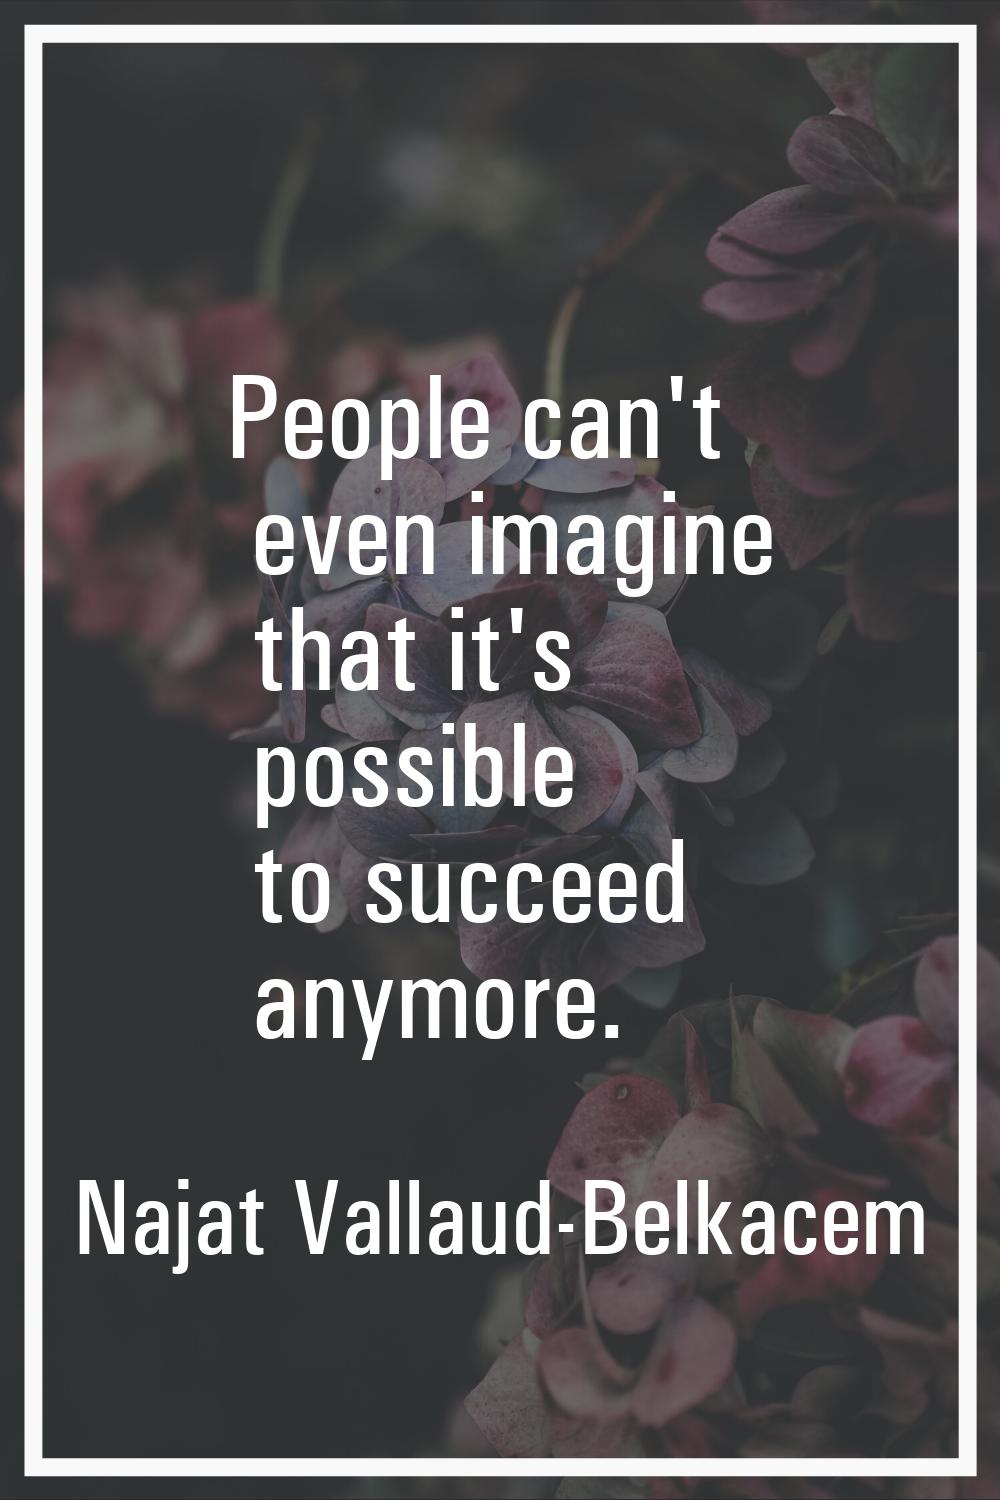 People can't even imagine that it's possible to succeed anymore.